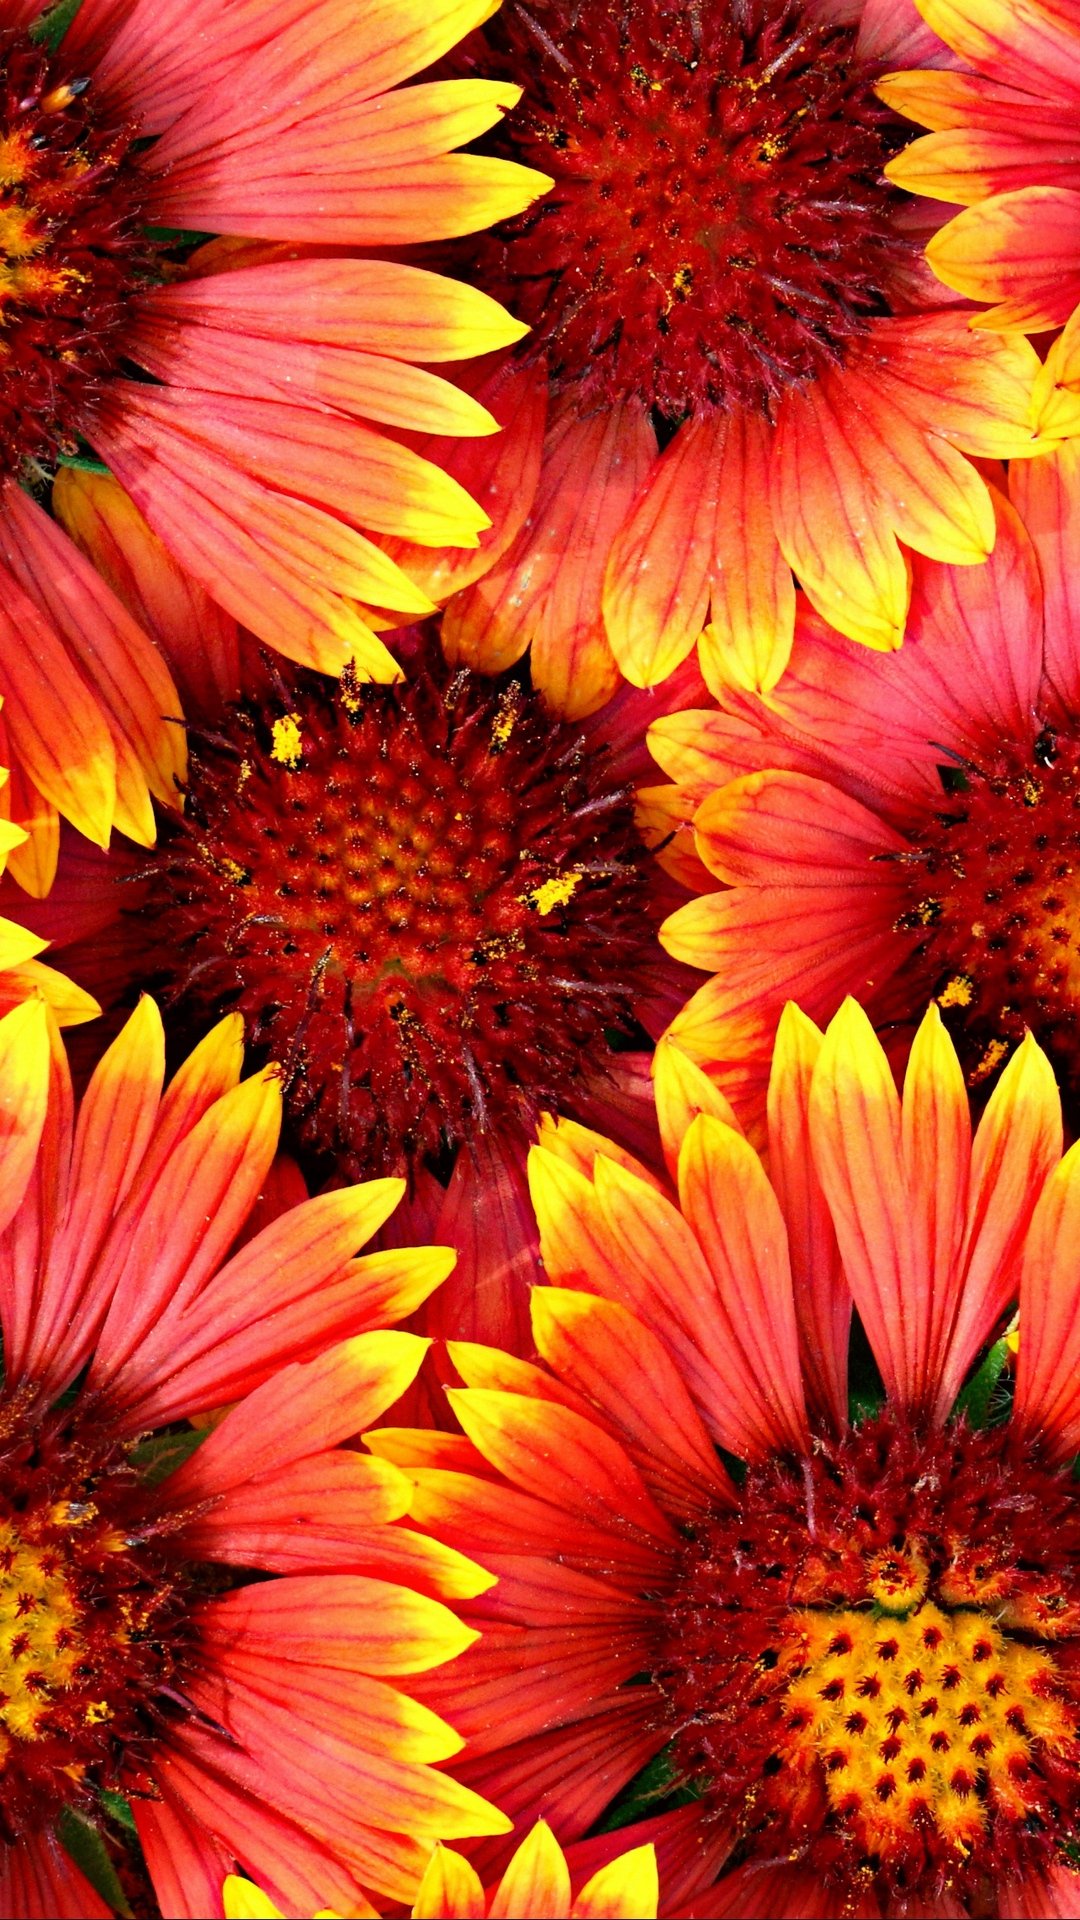 Download wallpaper 1080x1920 flowers, red, yellow samsung